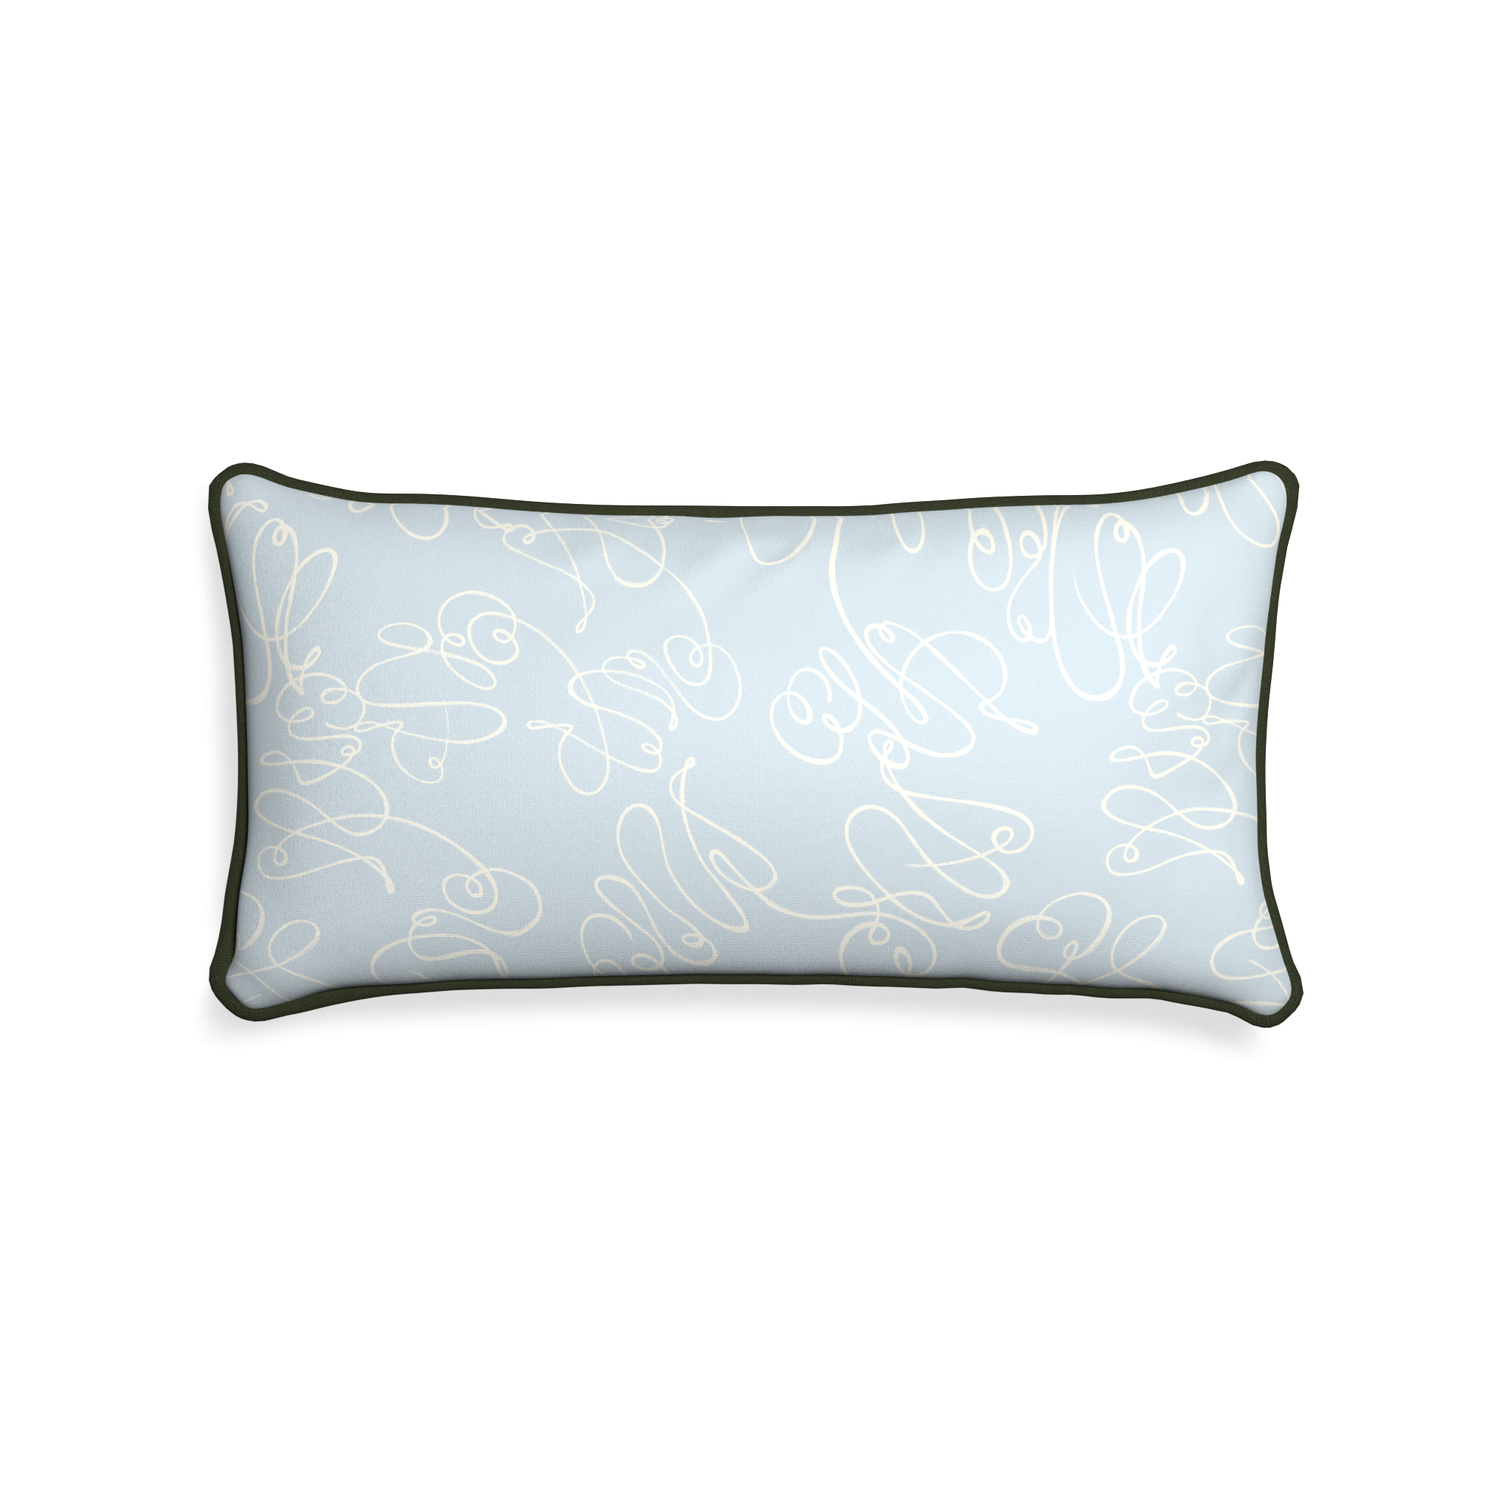 Midi-lumbar mirabella custom powder blue abstractpillow with f piping on white background